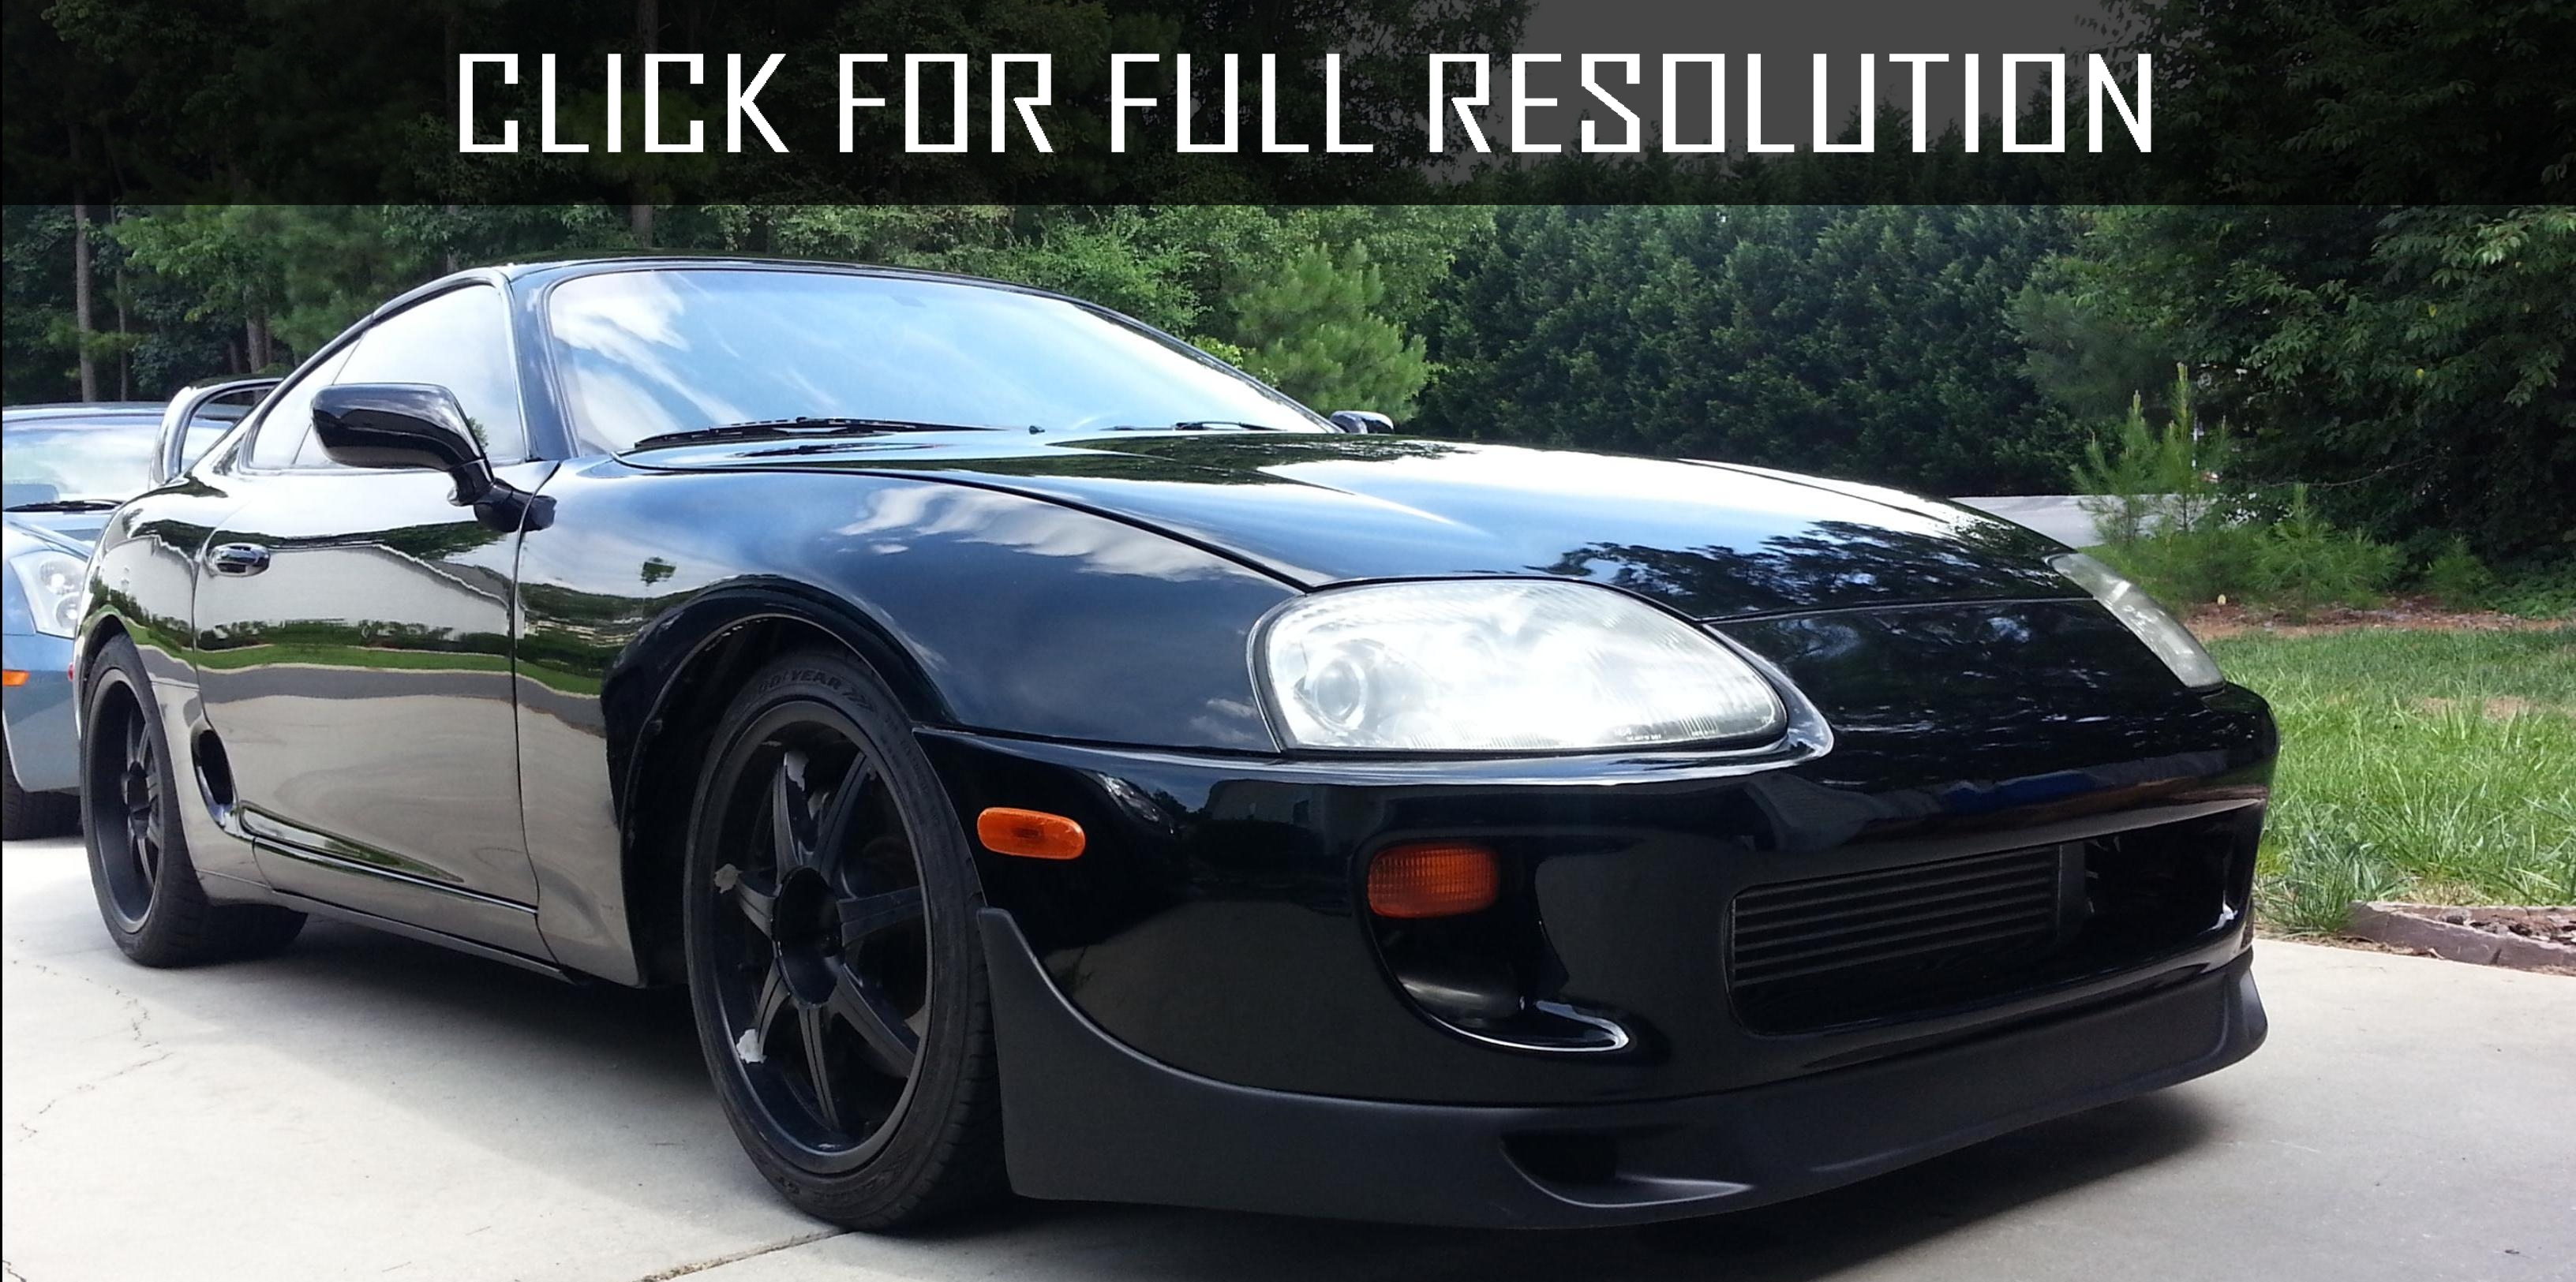 Toyota Supra Limited Edition amazing photo gallery, some